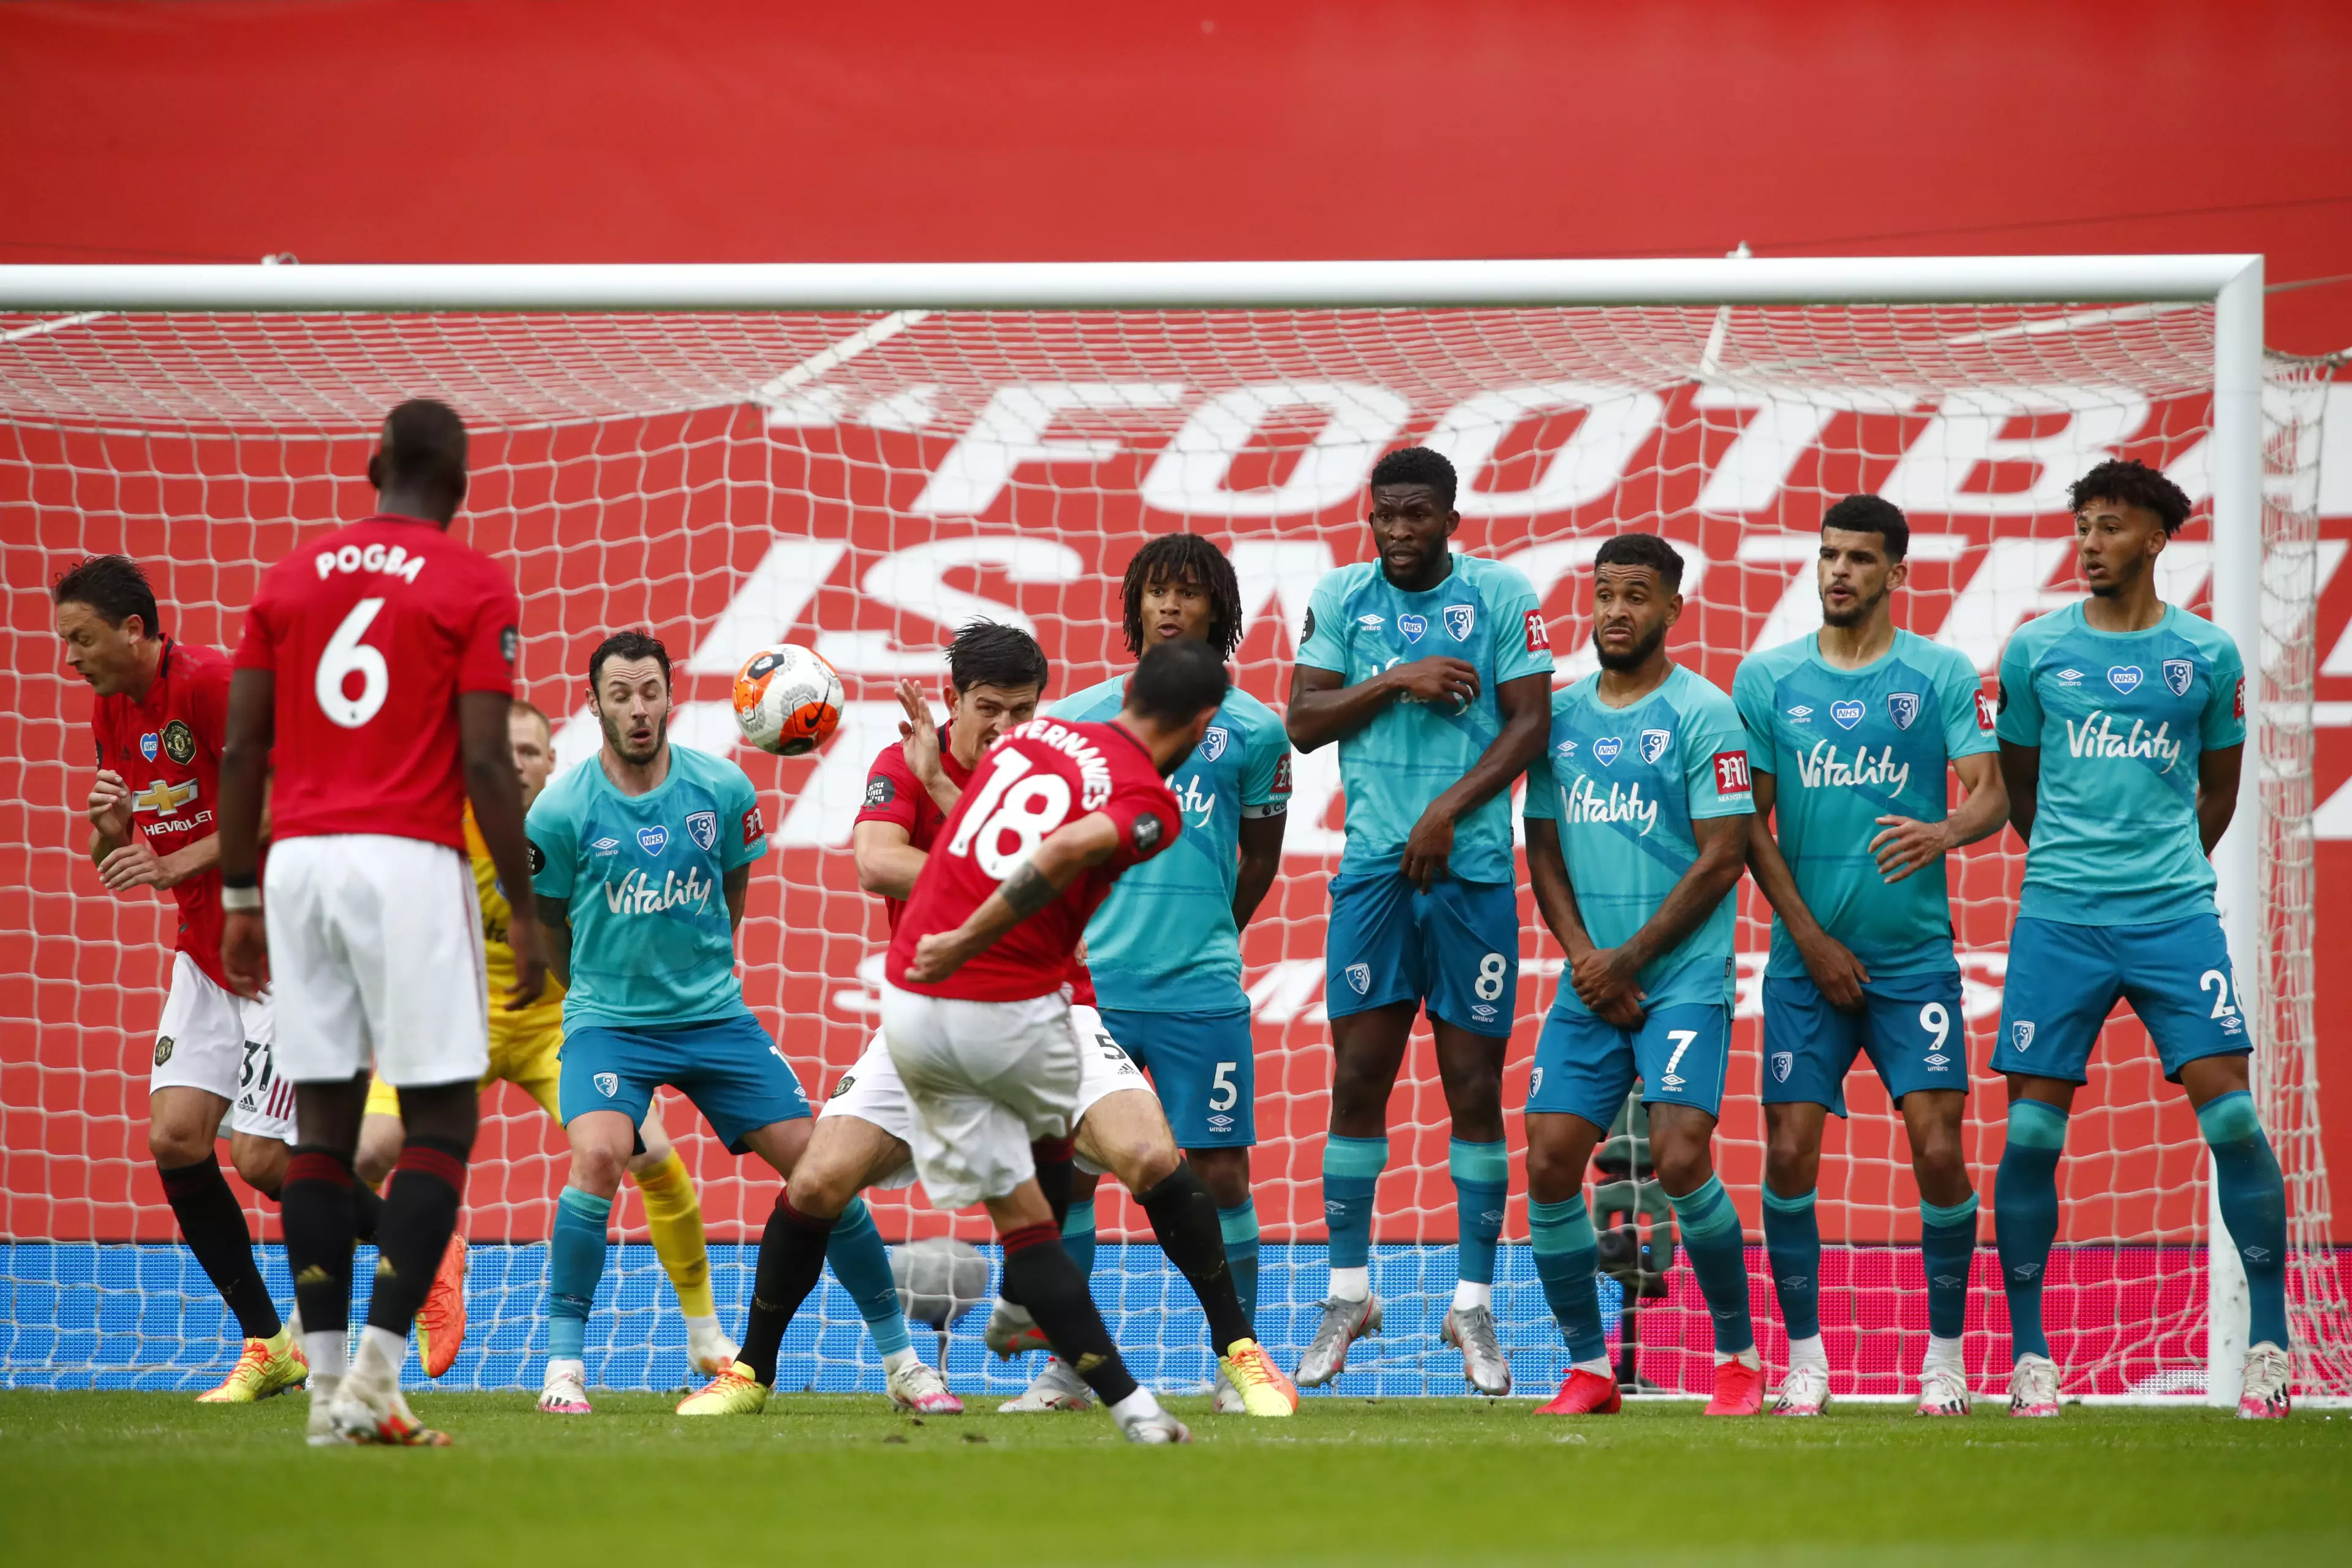 Fernandes curls in his free kick. Image: PA Images